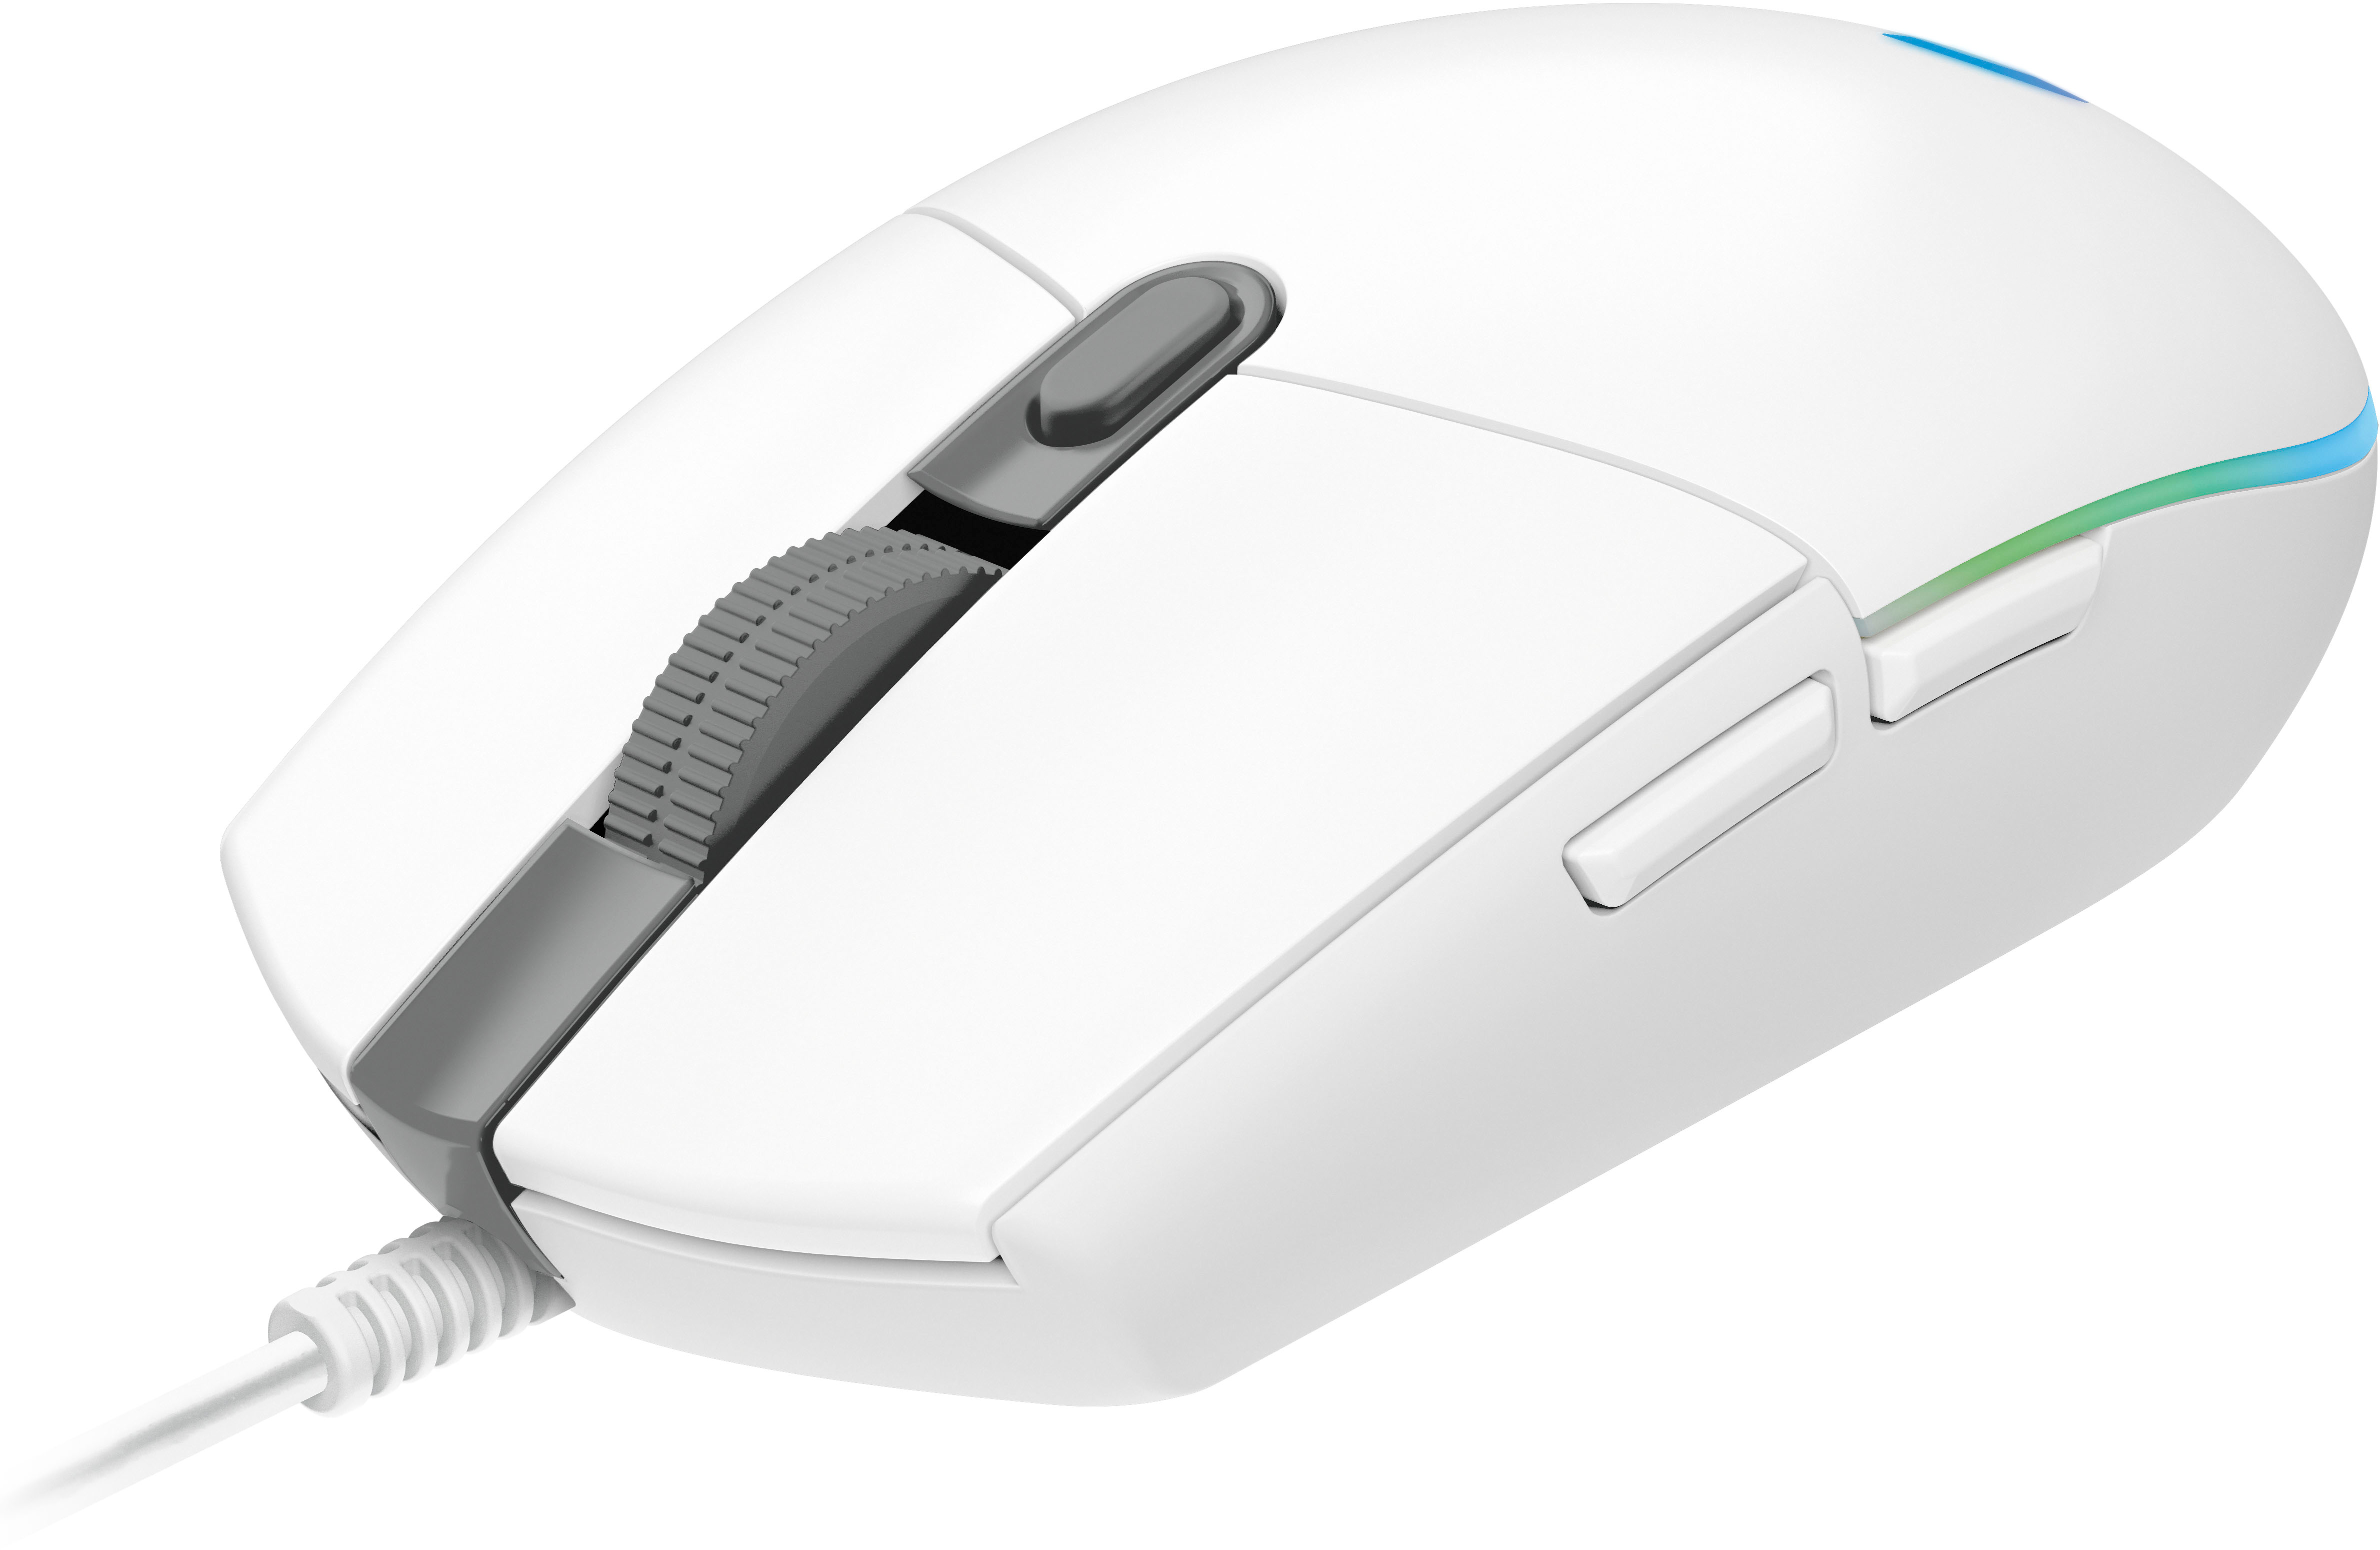 Logitech - G203 LIGHTSYNC Wired Optical Gaming Mouse with 8,000 DPI sensor - White